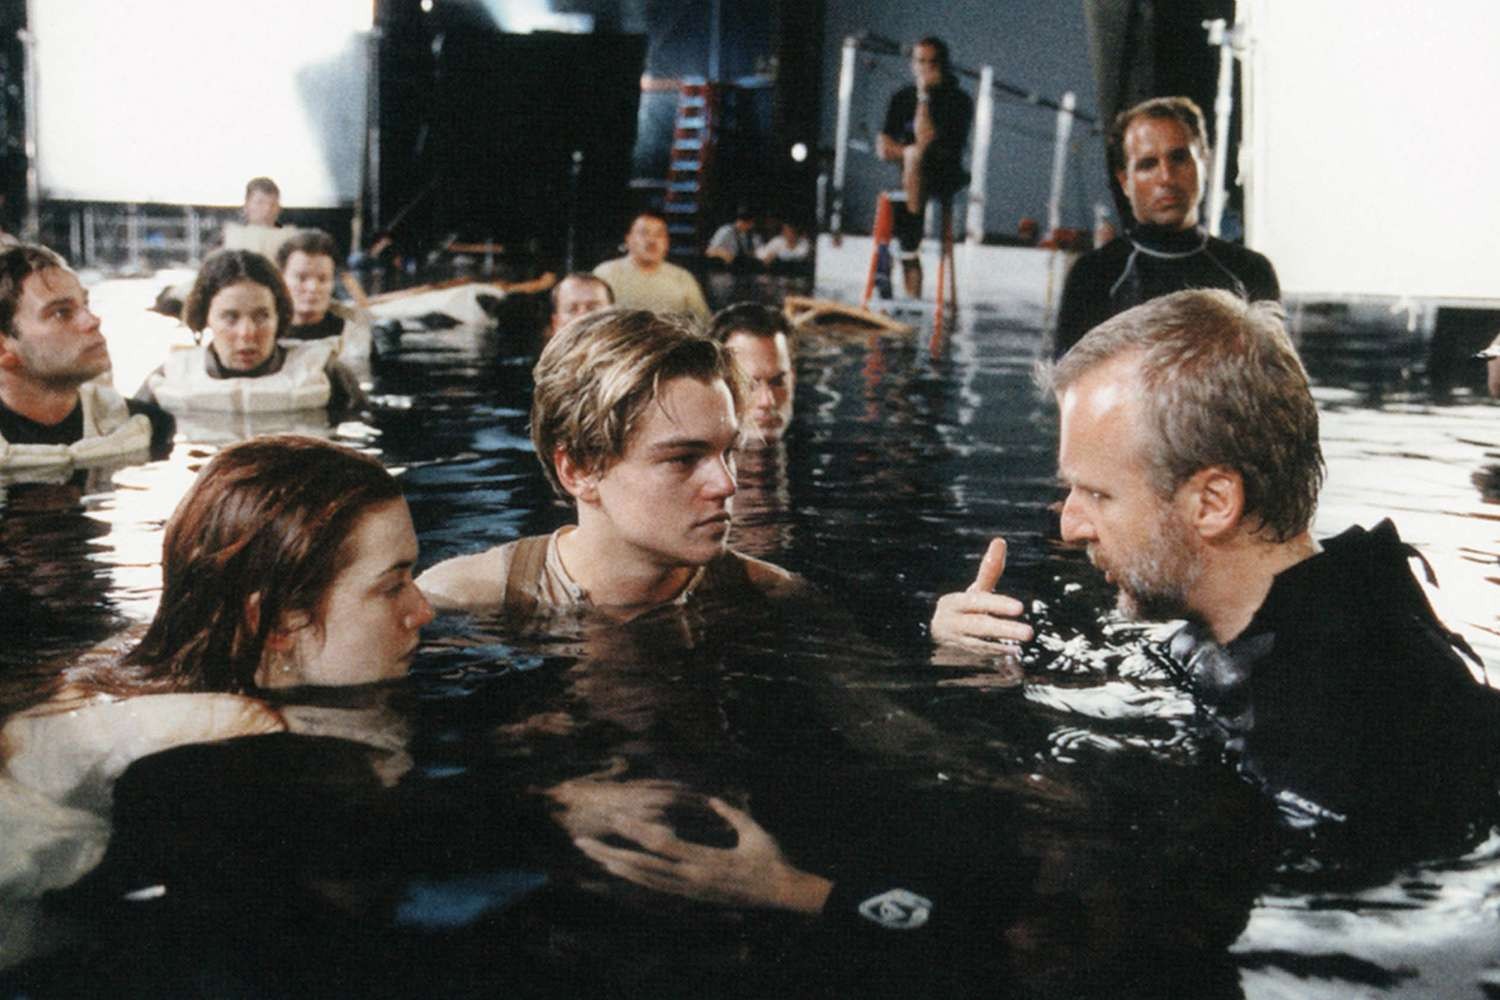 Titanic director James Cameron planned to produce an X-Men film directed by his ex-wife Kathryn Bigelow